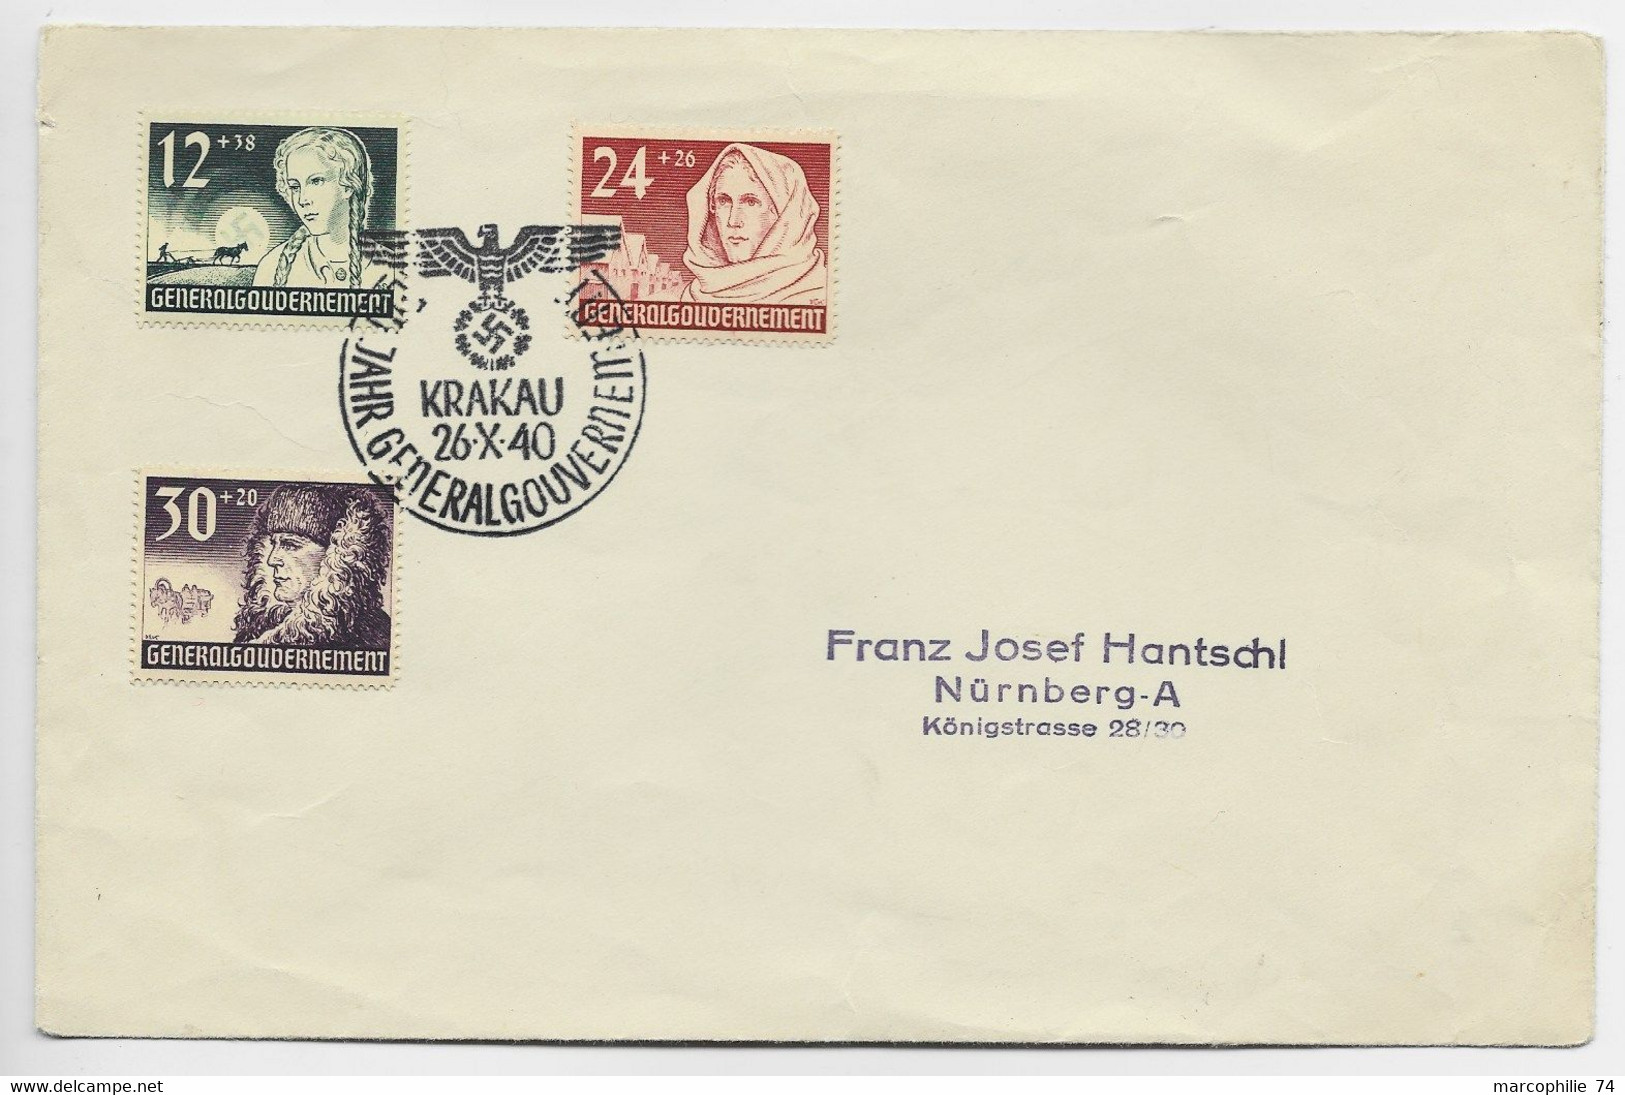 GENERAL GOUVERNEMENT POLAND POLSKA SURTAXE 12C+24C+30C LETTRE COVER BRIEF KRAKAU 26.X.1940 TO GERMANY - General Government